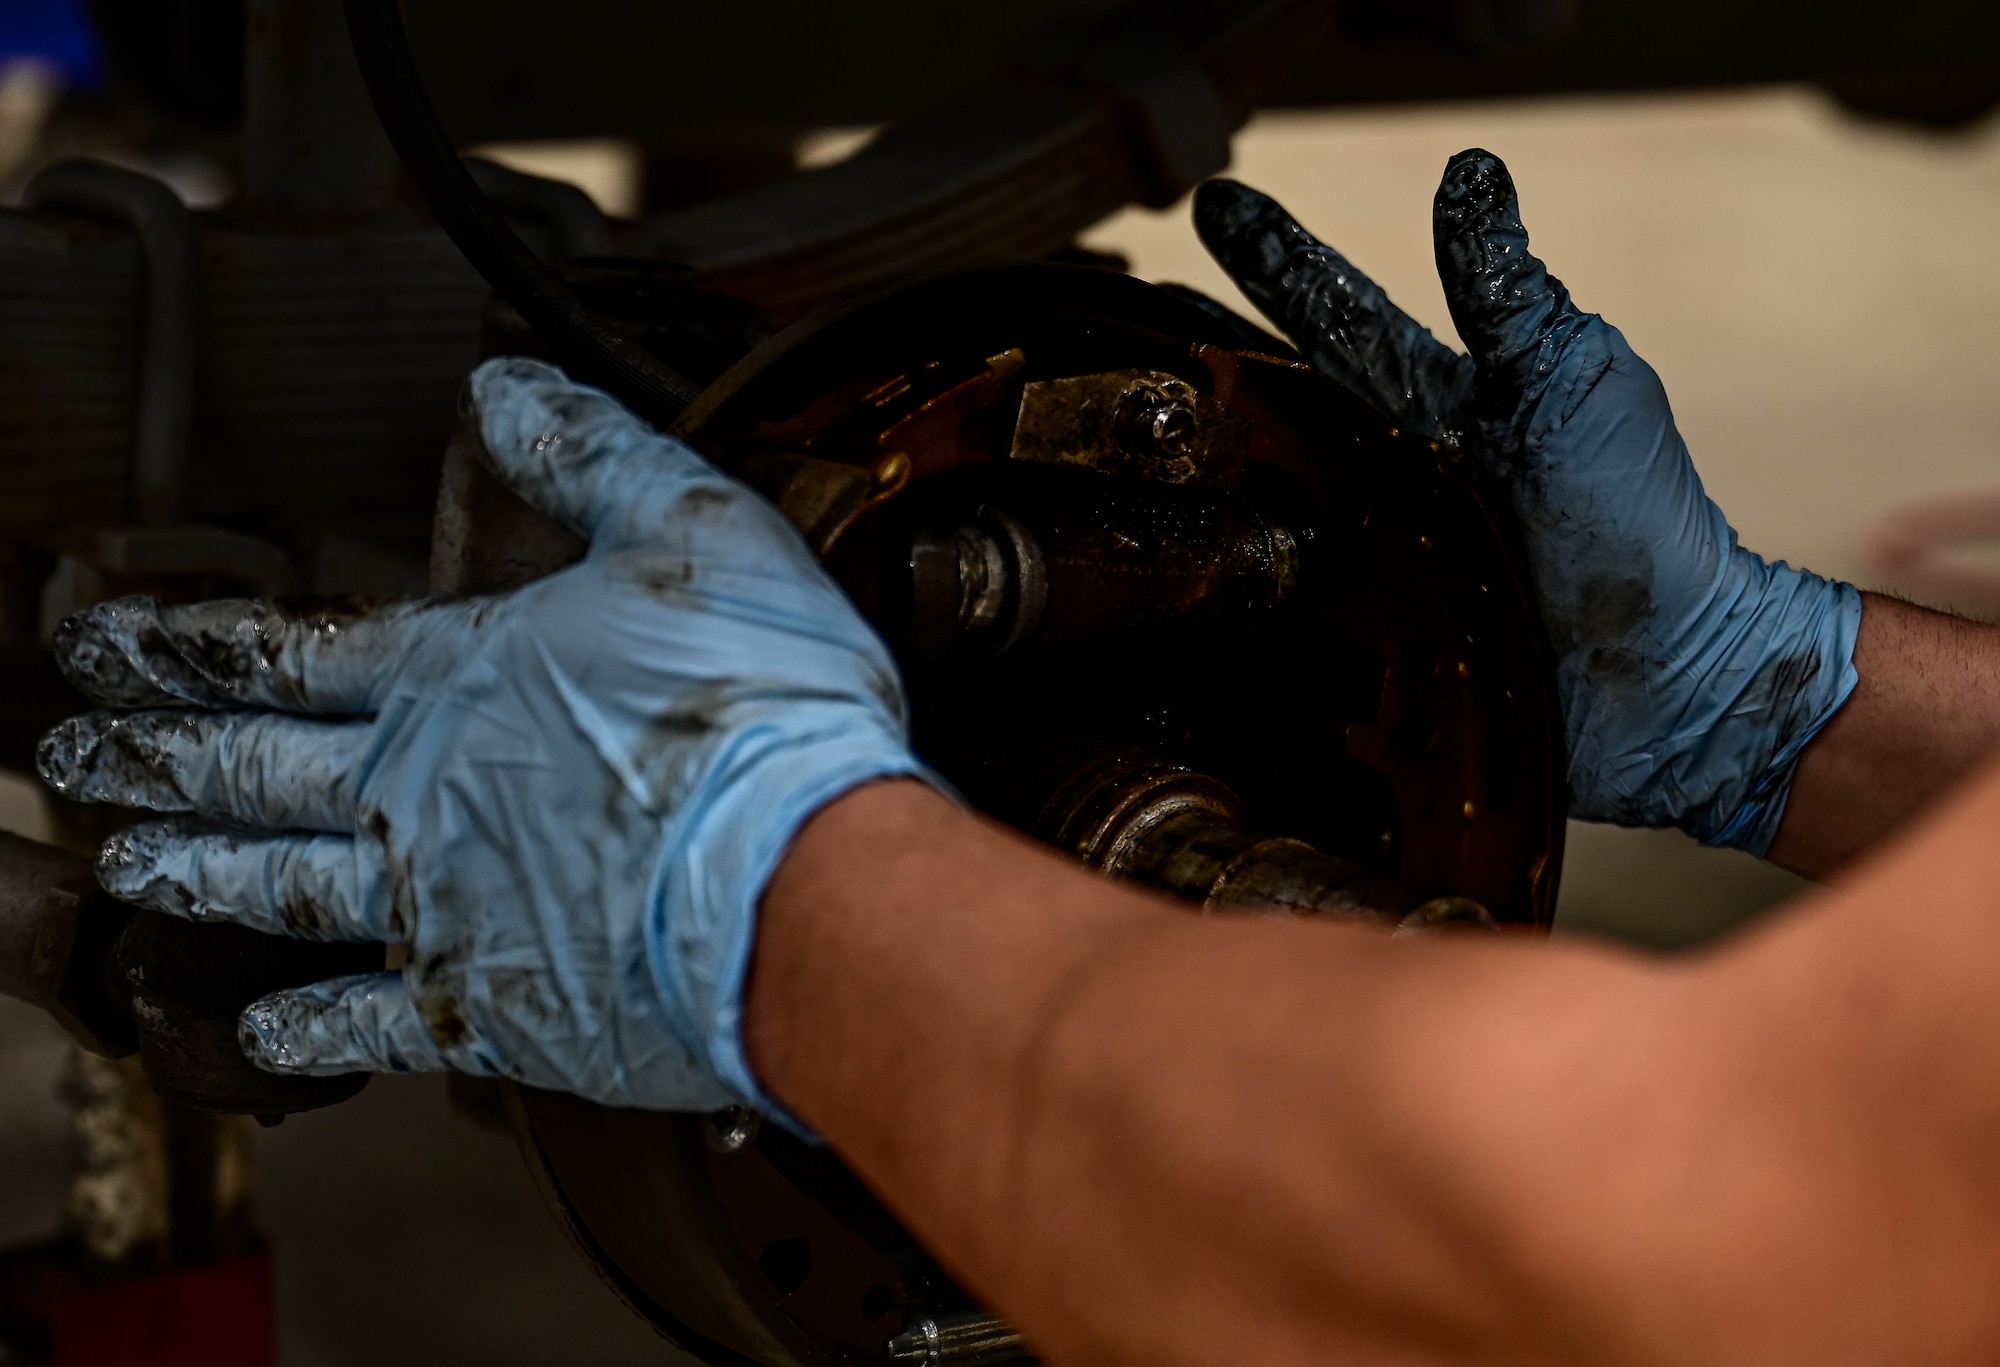 An Airman from the 8th Maintenance Squadron munitions support equipment maintenance section adjusts the rotors on a munitions trailer at Kunsan Air Base, Republic of Korea, Mar 15, 2023.